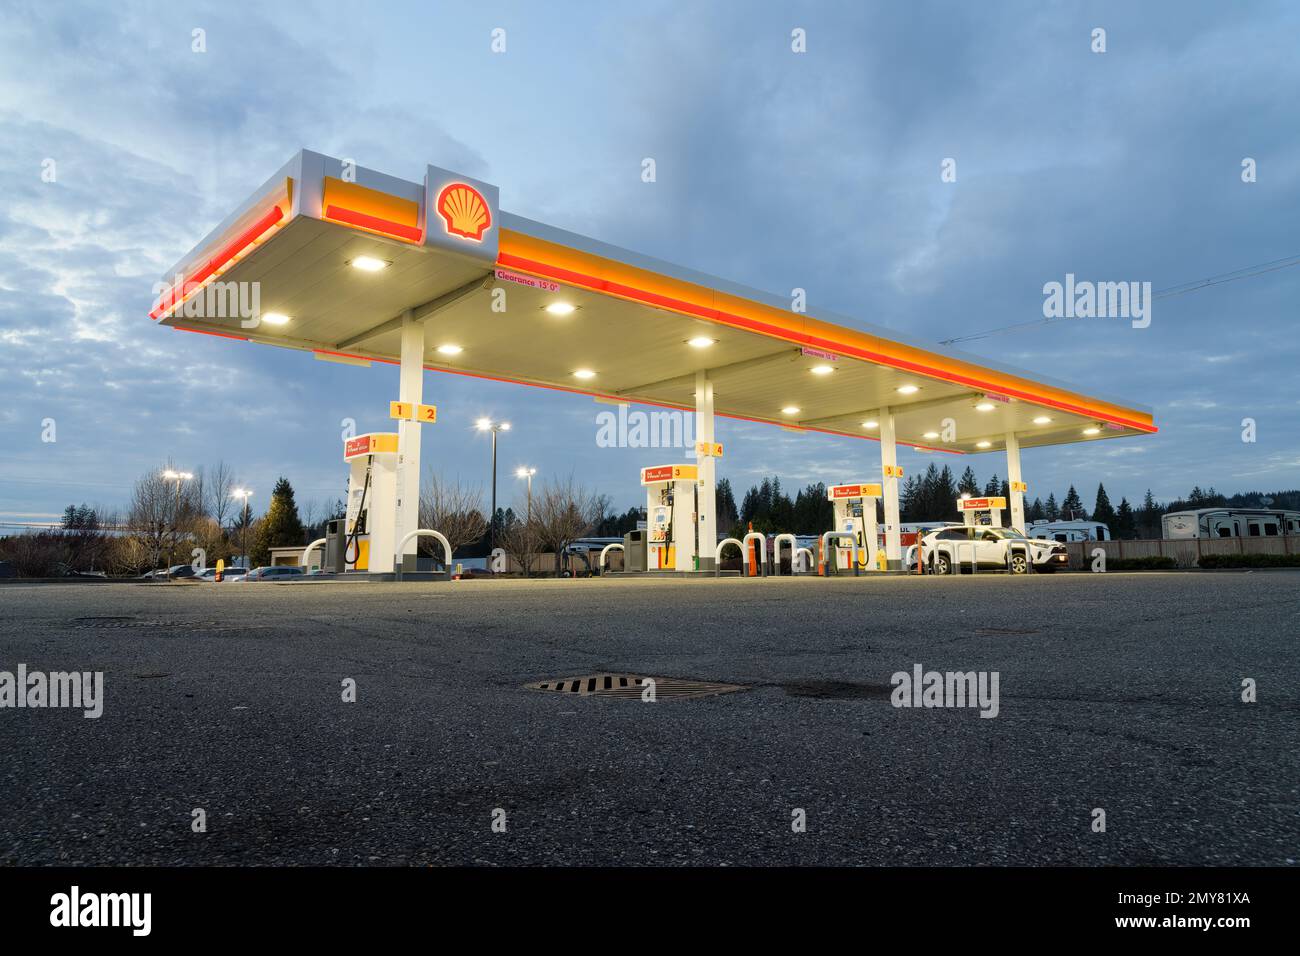 Sultan, WA, USA - February 01, 2023; Shell gas station pumps with illuminated awning and sign Stock Photo